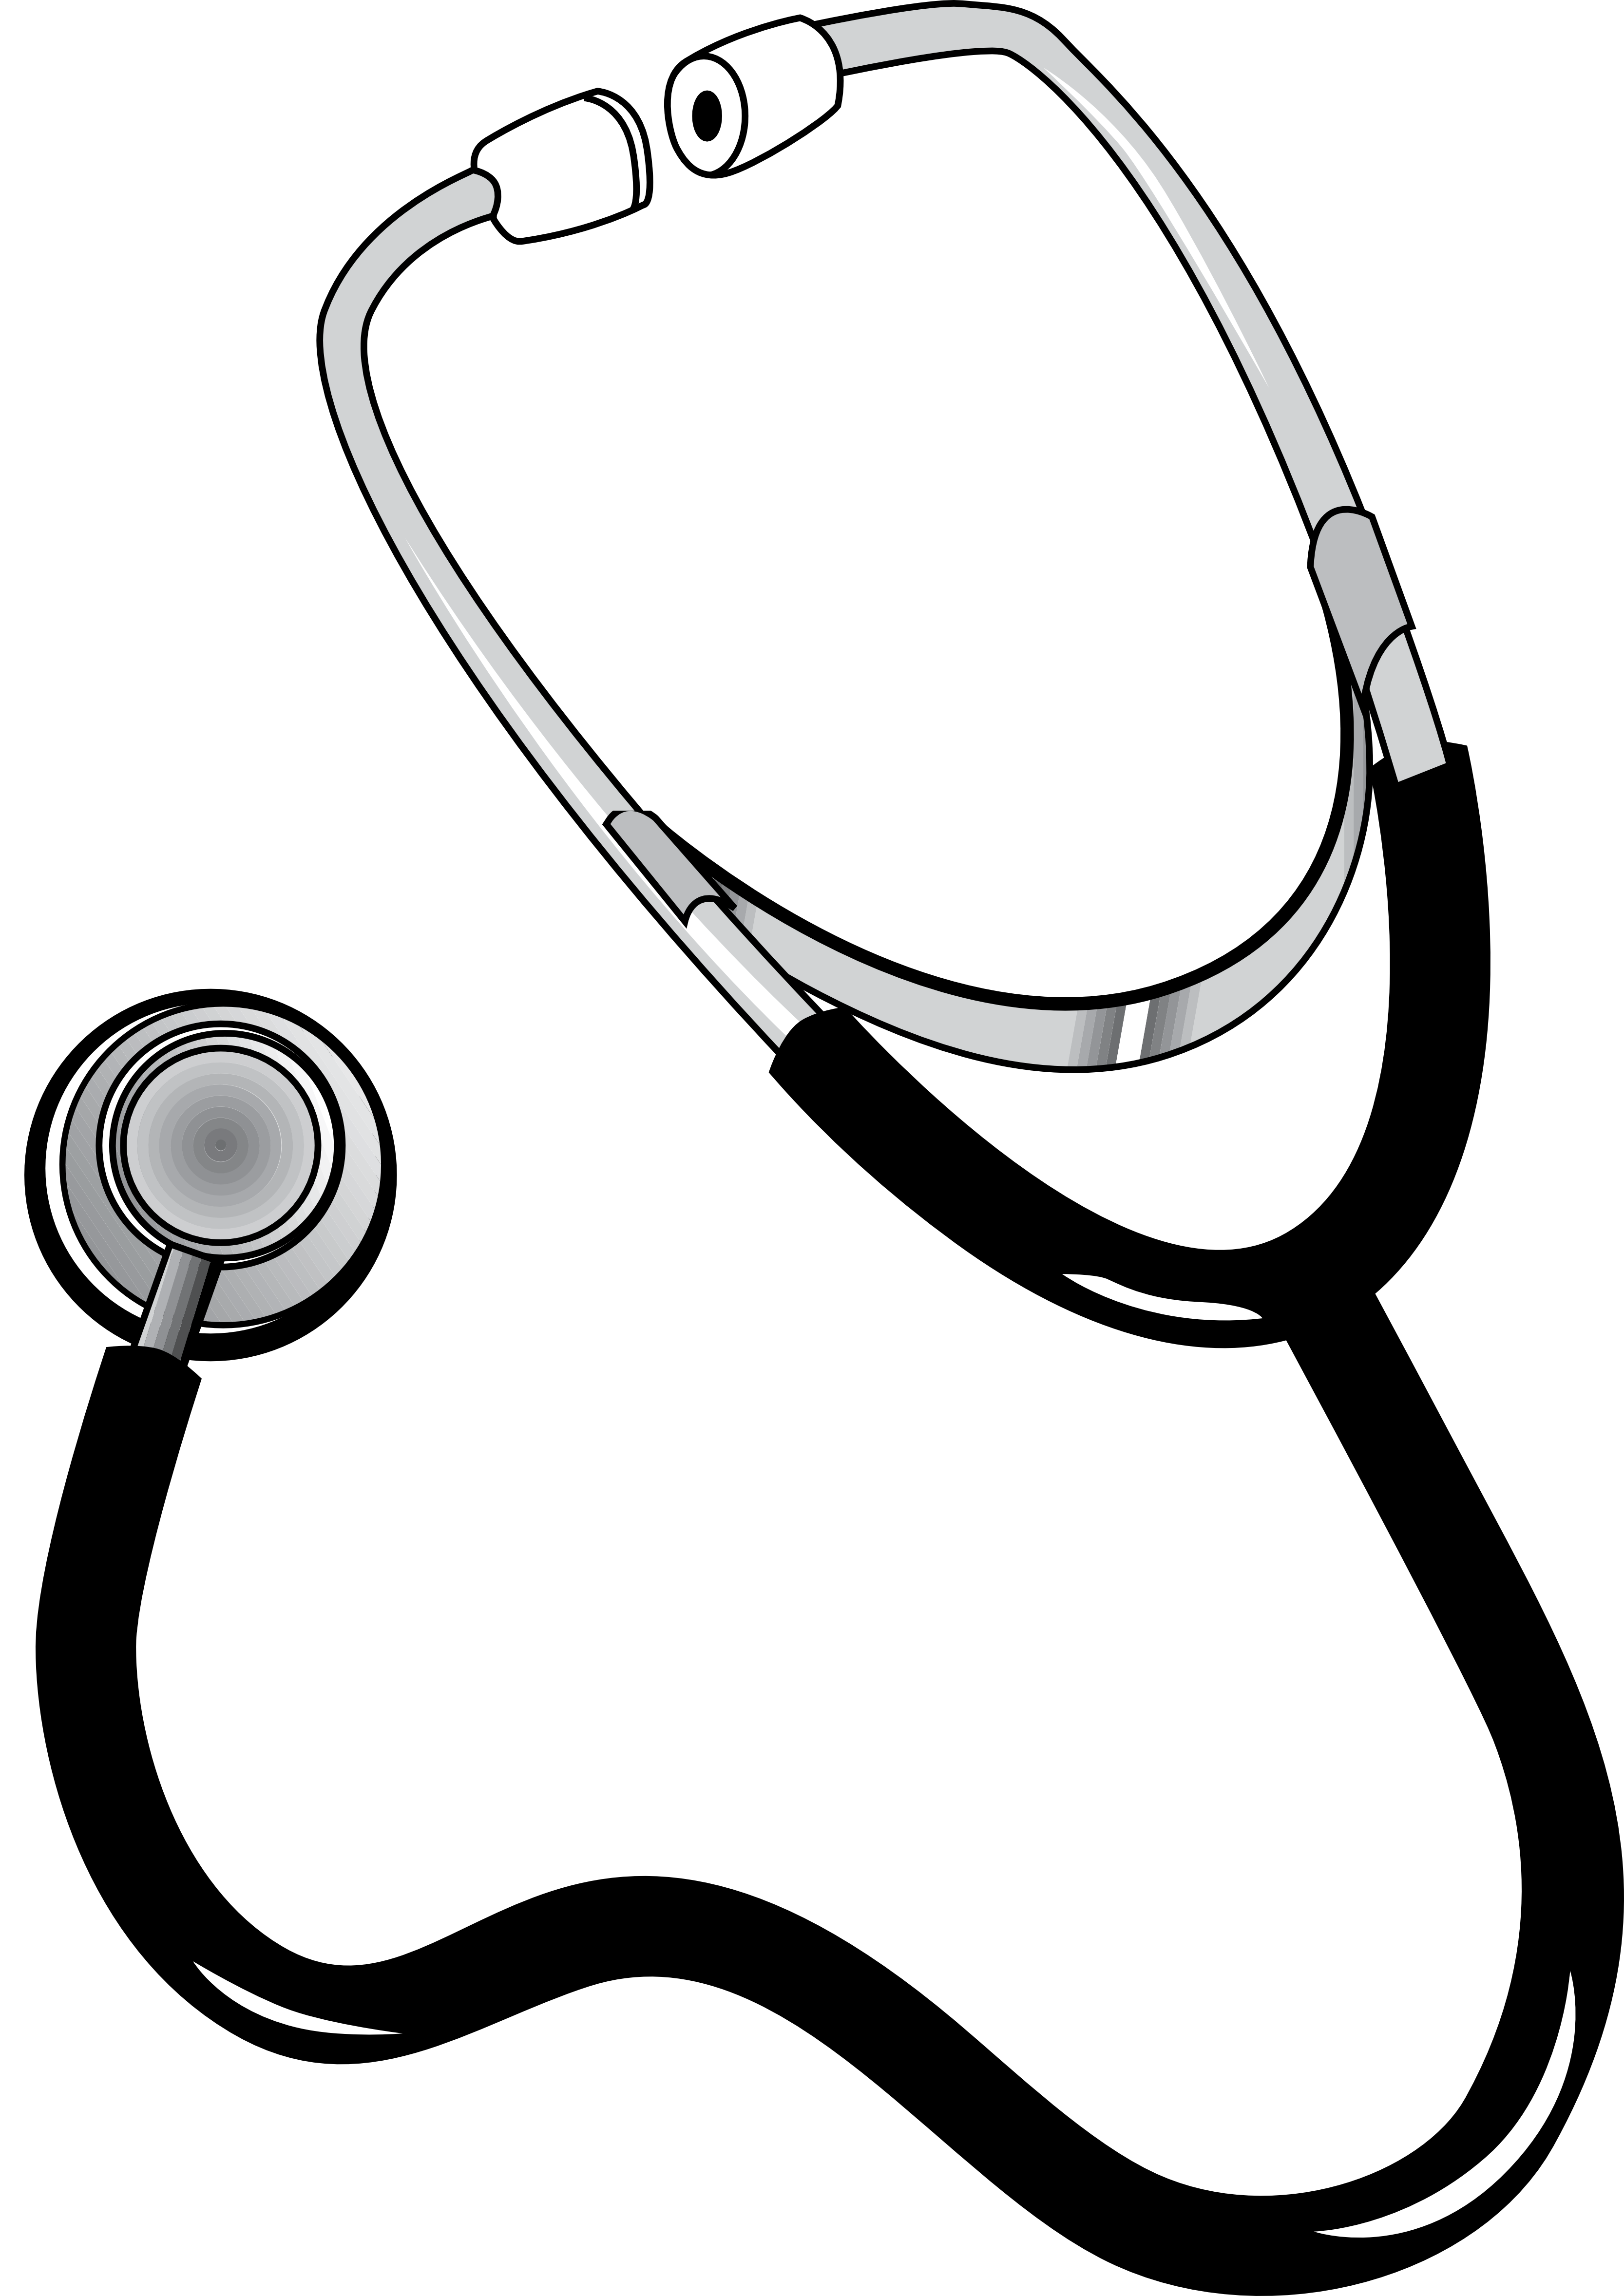 Stethoscope Clip Art Free | Clipart Panda - Free Clipart Images